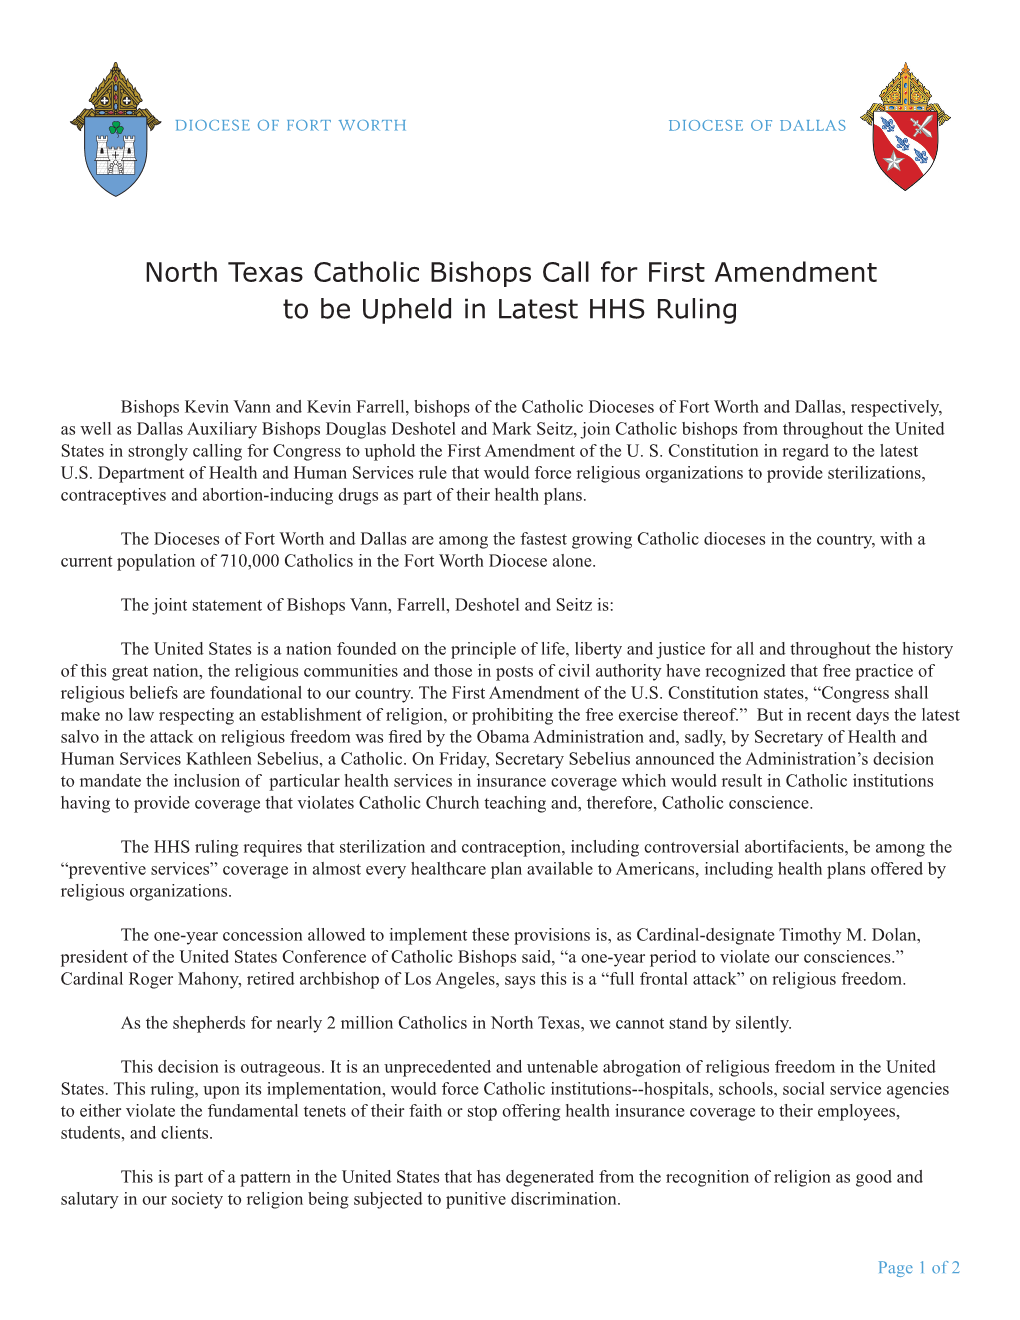 North Texas Catholic Bishops Call for First Amendment to Be Upheld in Latest HHS Ruling